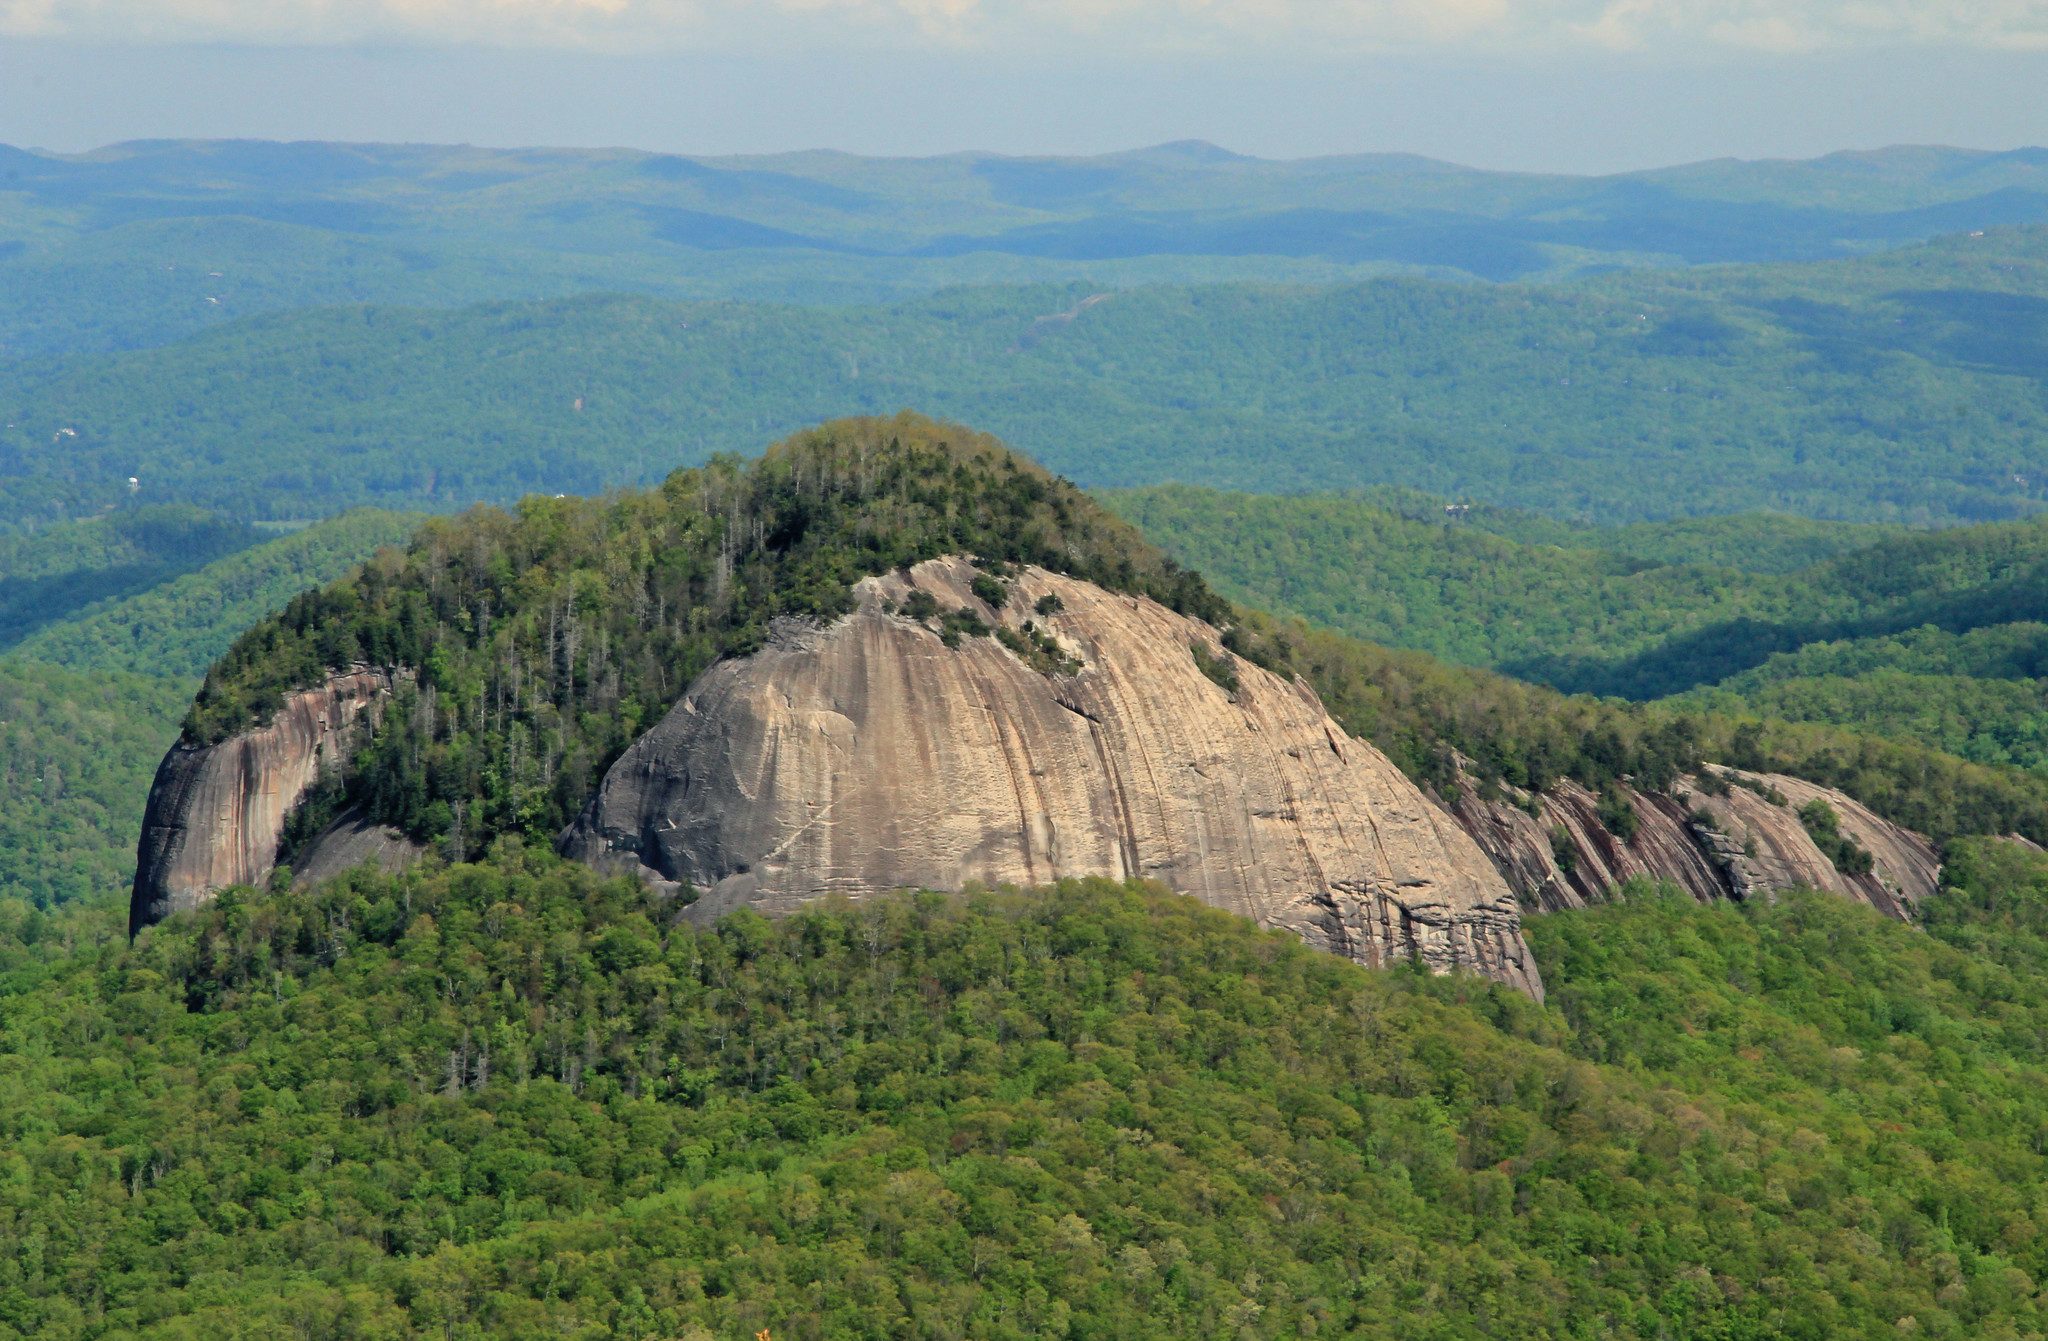 A photo of the Looking Glass Rock in the Pisgah National Forest, North Carolina